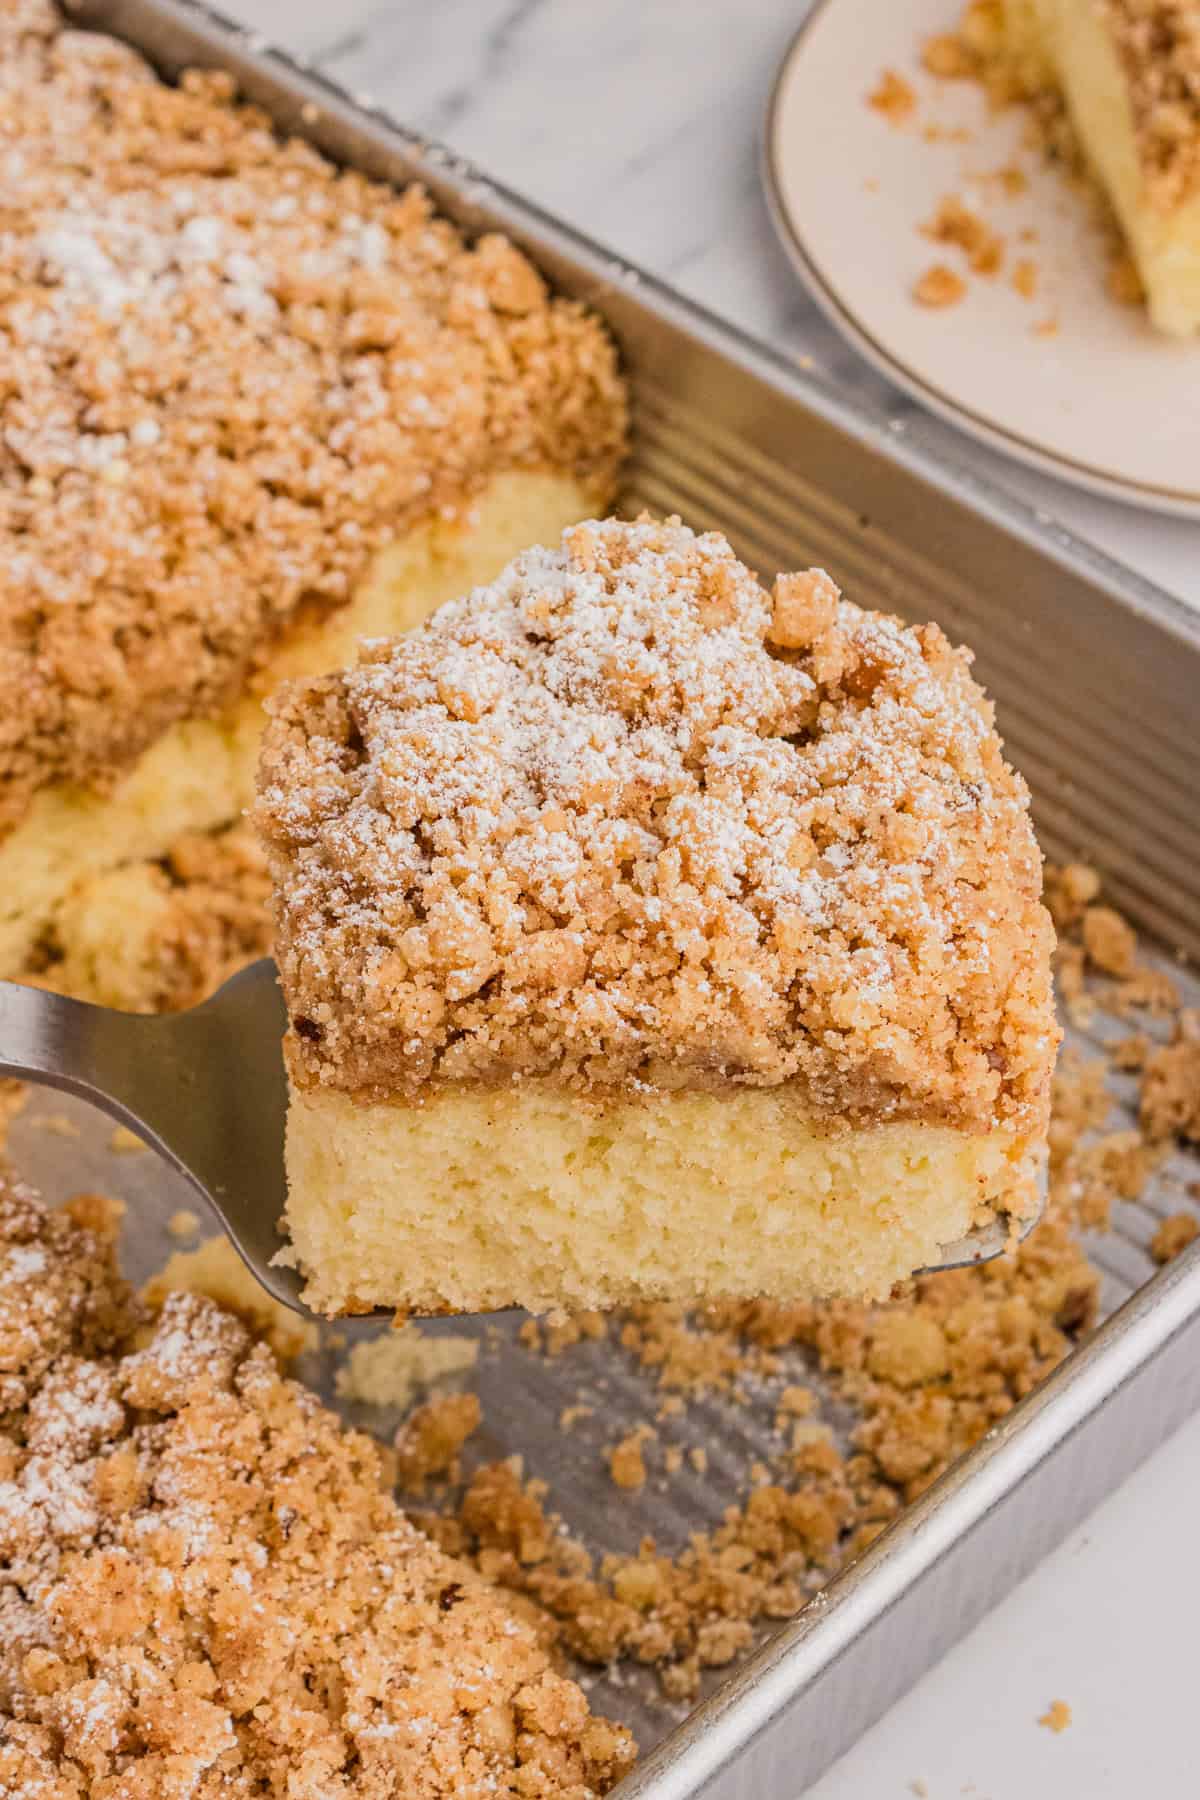 Slice of cake mix crumb cake being removed from pan with metal spatula.